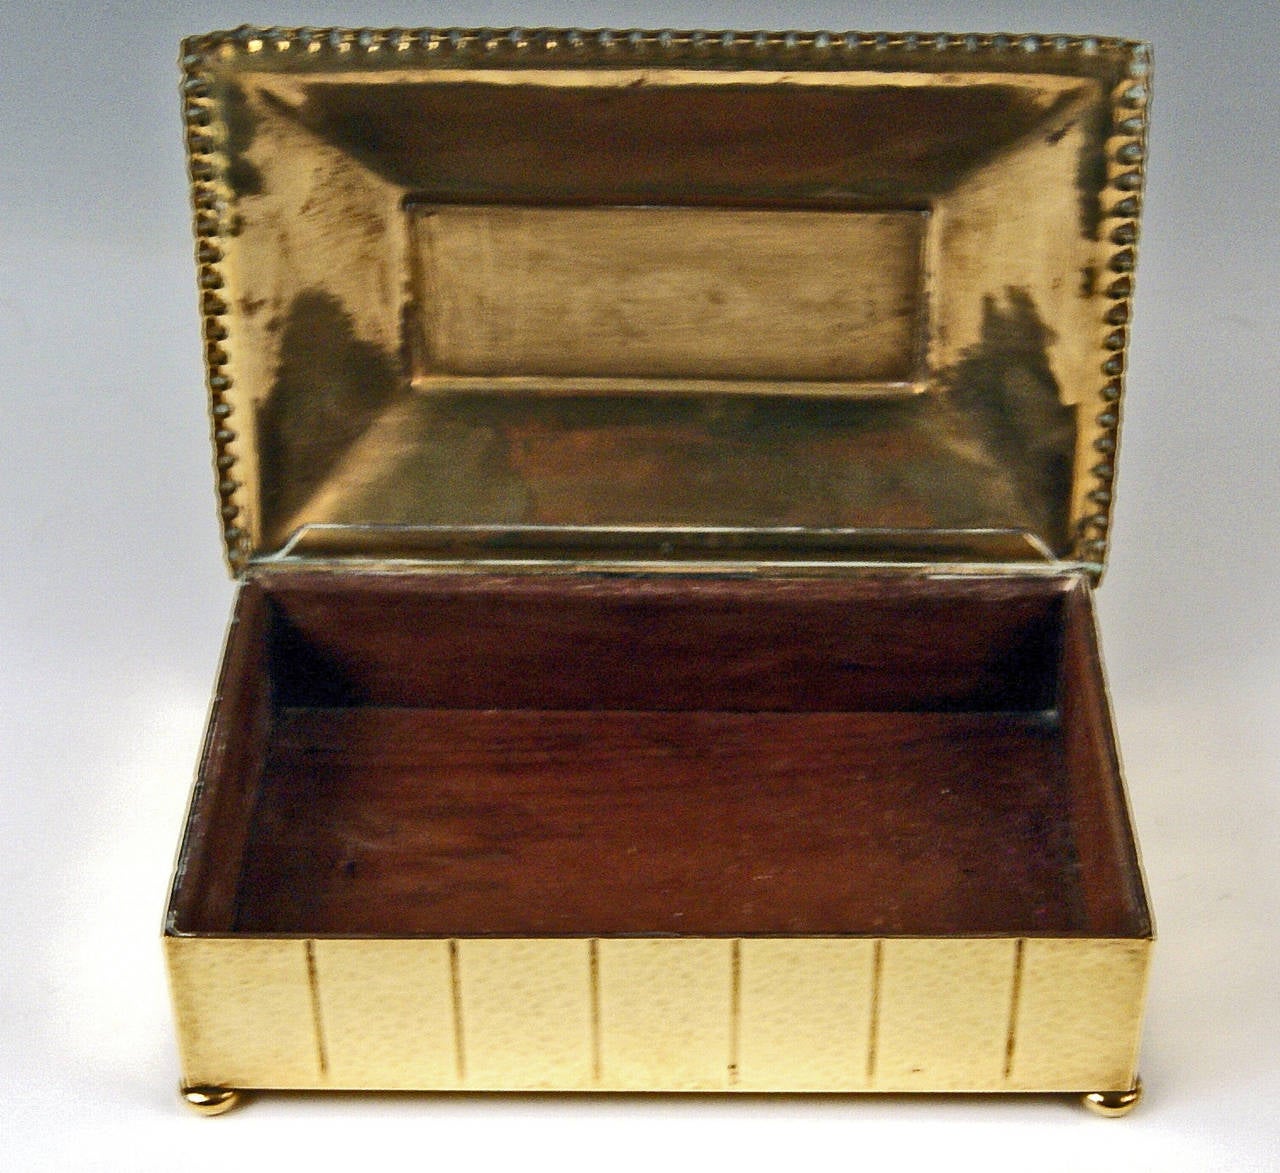 Early 20th Century German Brass Art Deco Lidded Gorgeous Box Casket by WMF, circa 1920 - 1925 For Sale